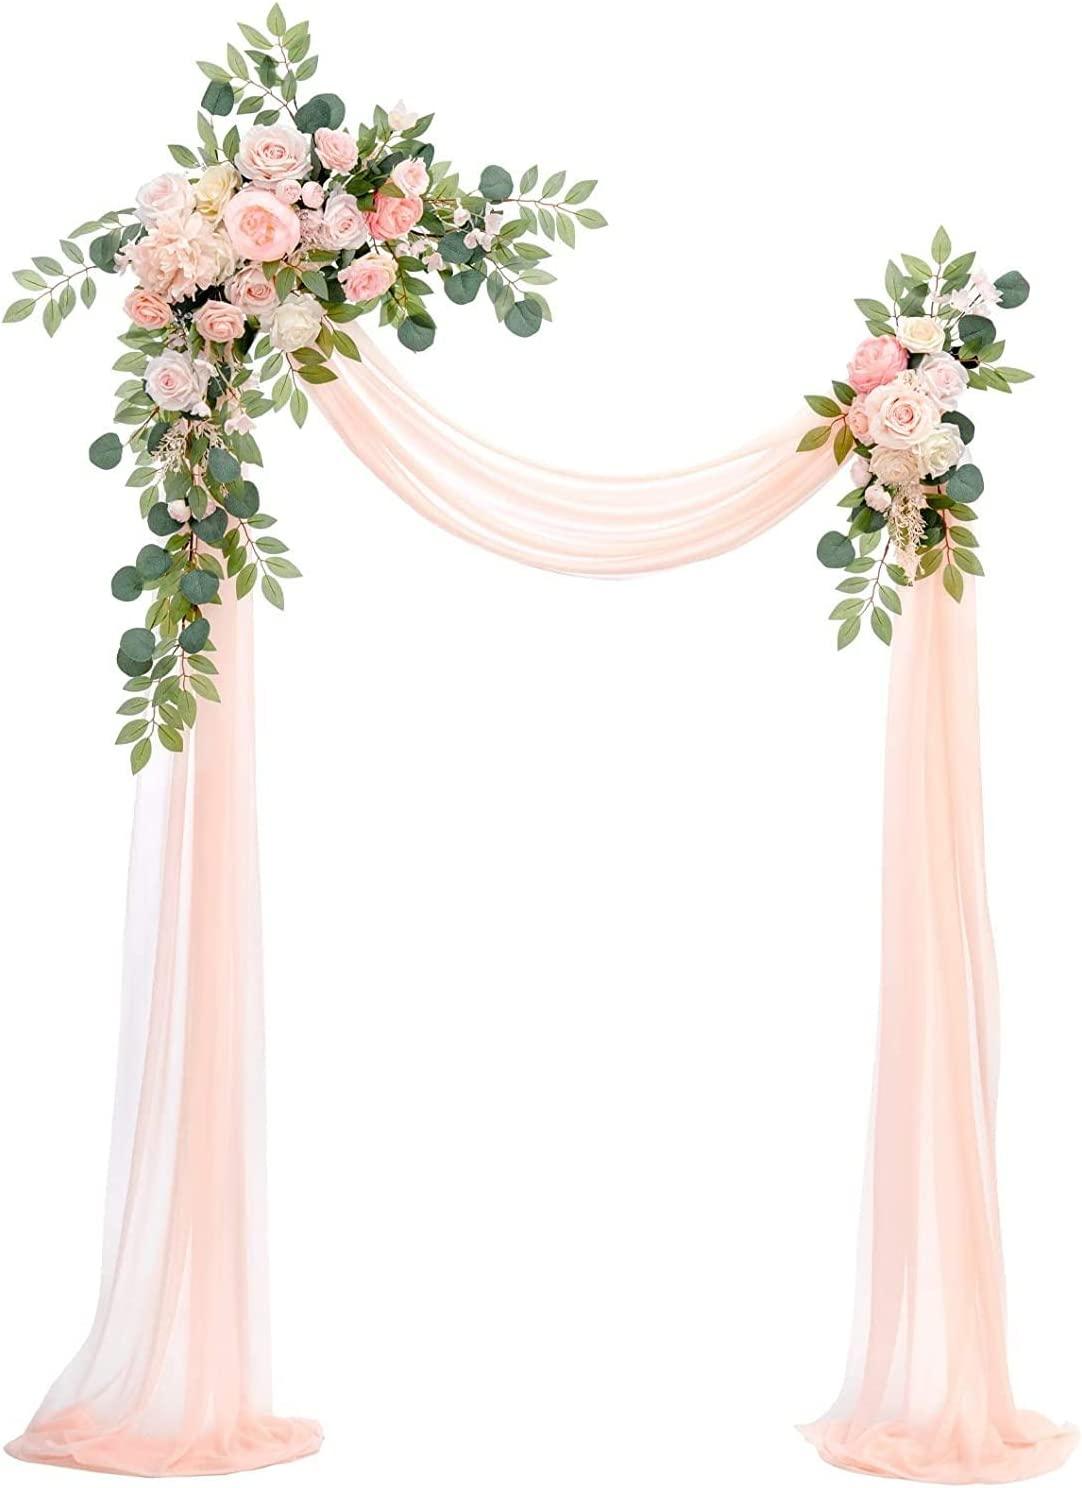 Wedding Arch Flower Arrangement Set Rustic Wedding Arch Decorations with 1pc Sheer Swag for Ceremony and Reception - If you say i do